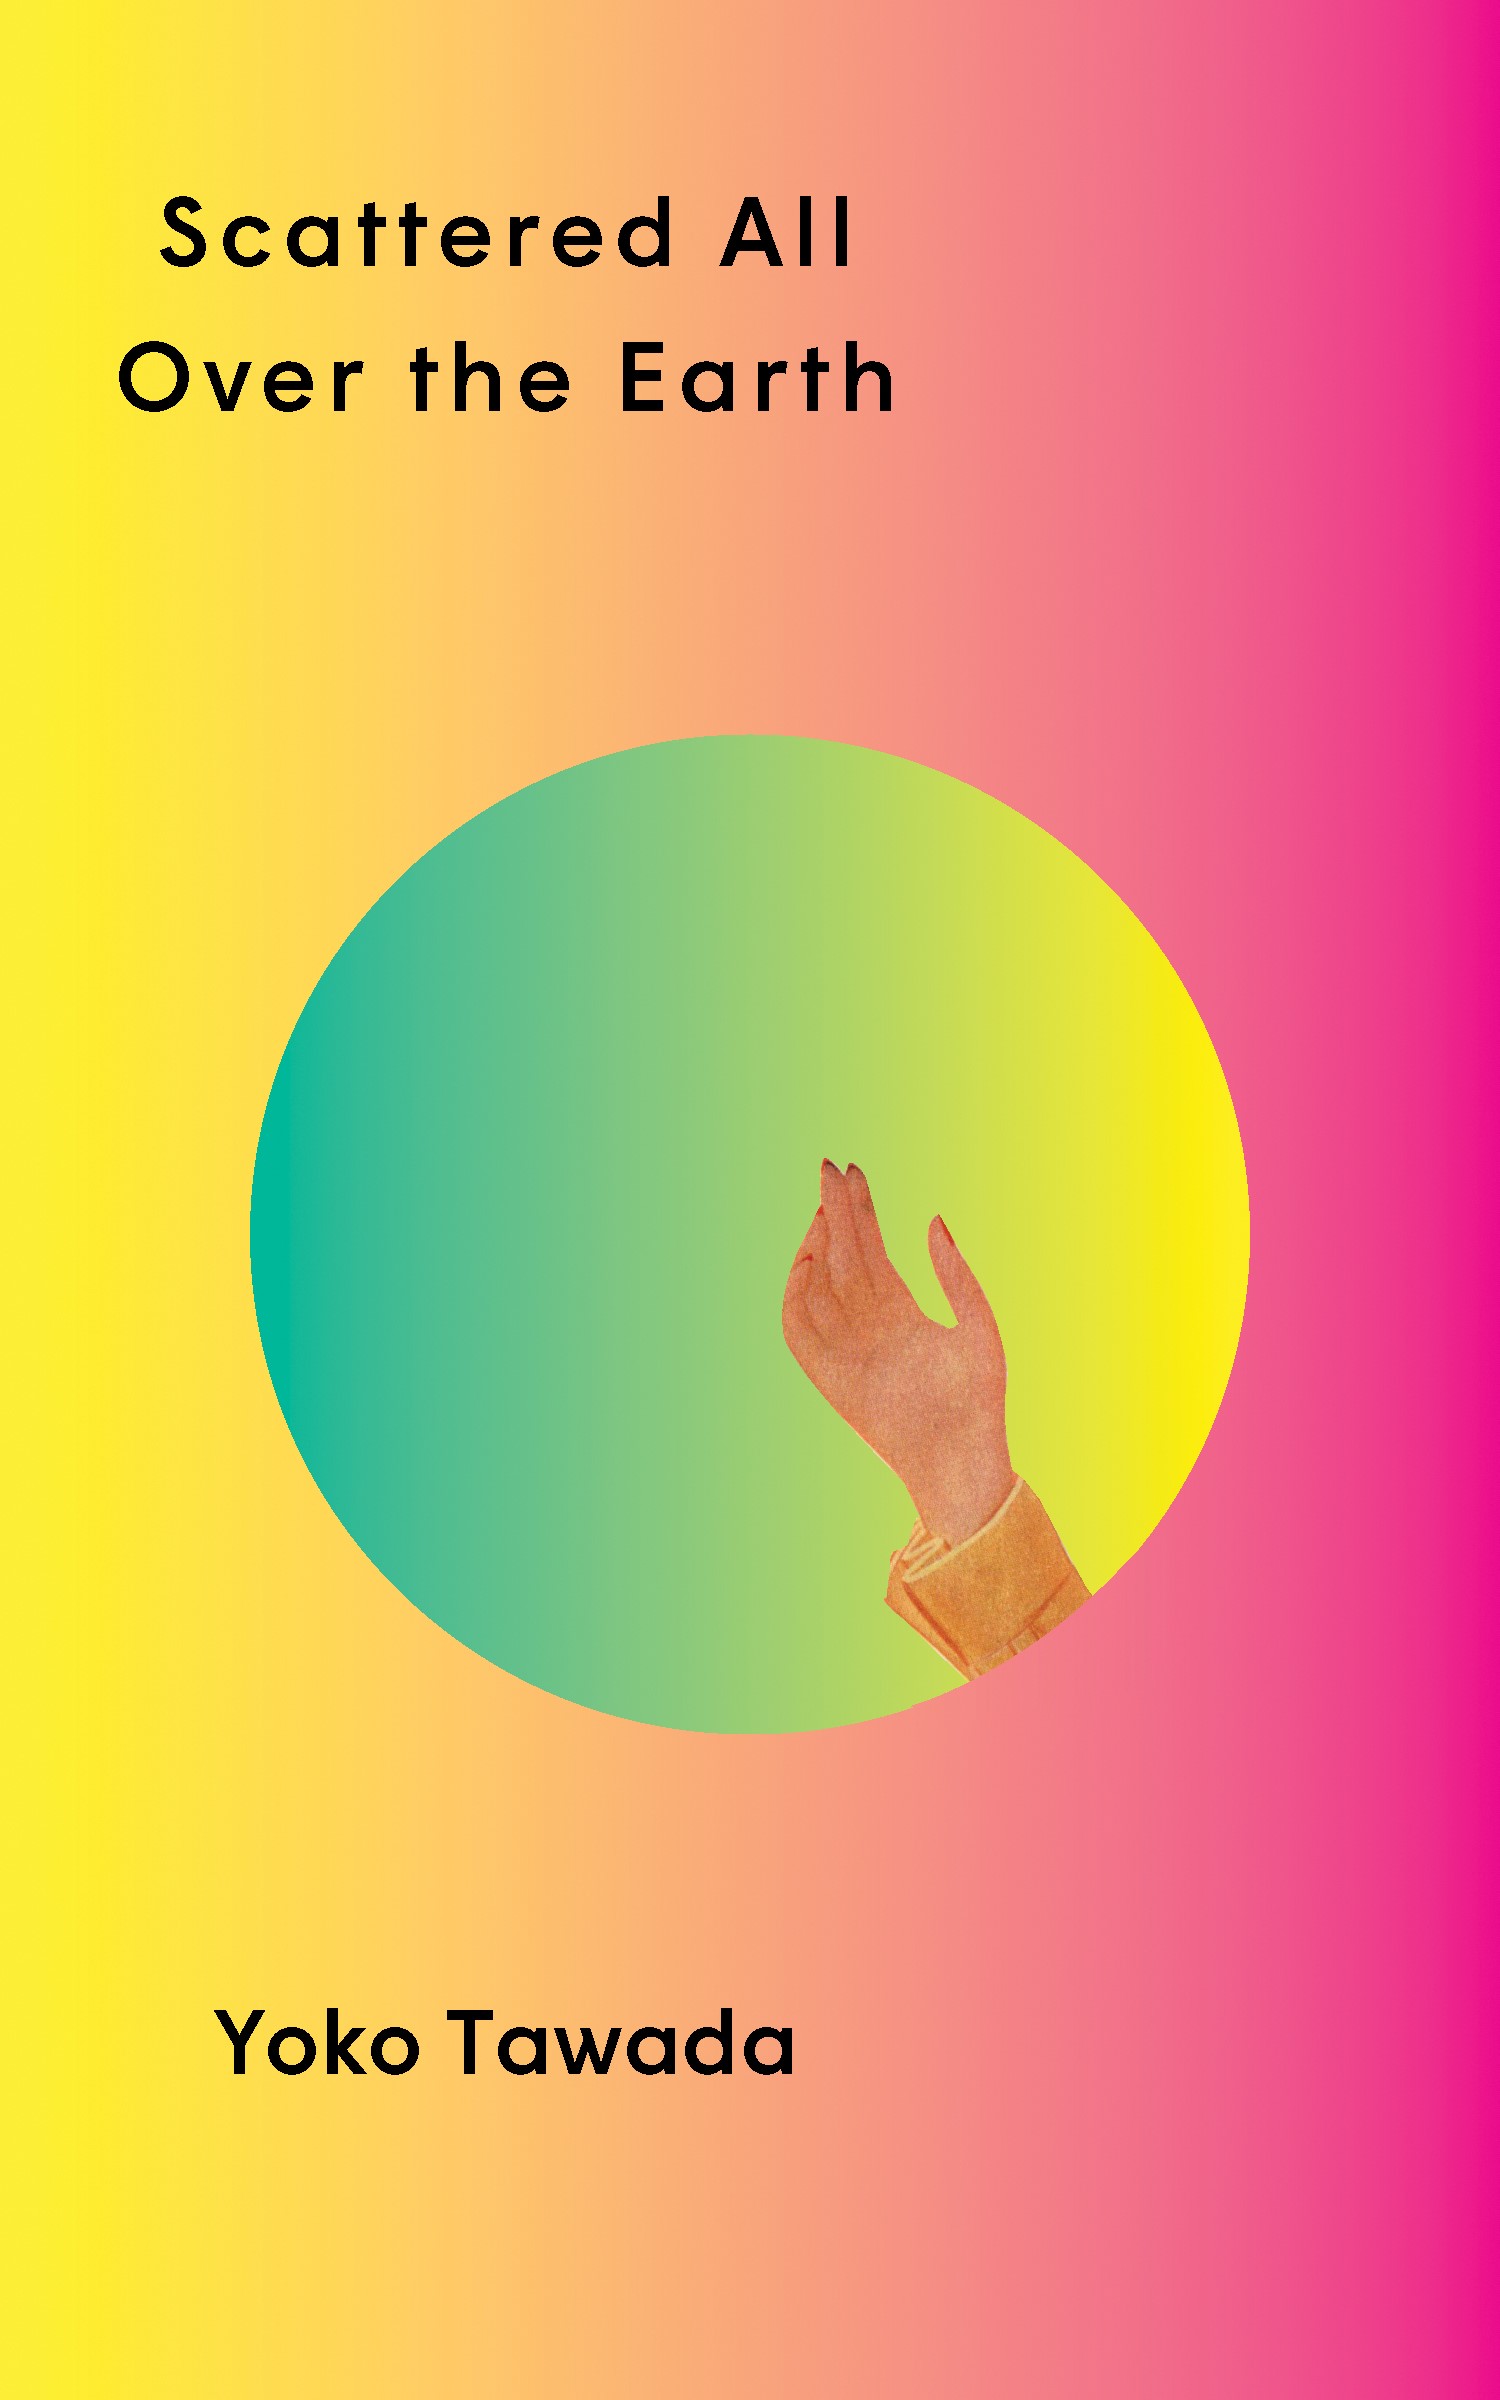 The book cover of Scattered All Over the Earth by Yoko Tawada features a woman's manicured hand in a bright-coloured circle